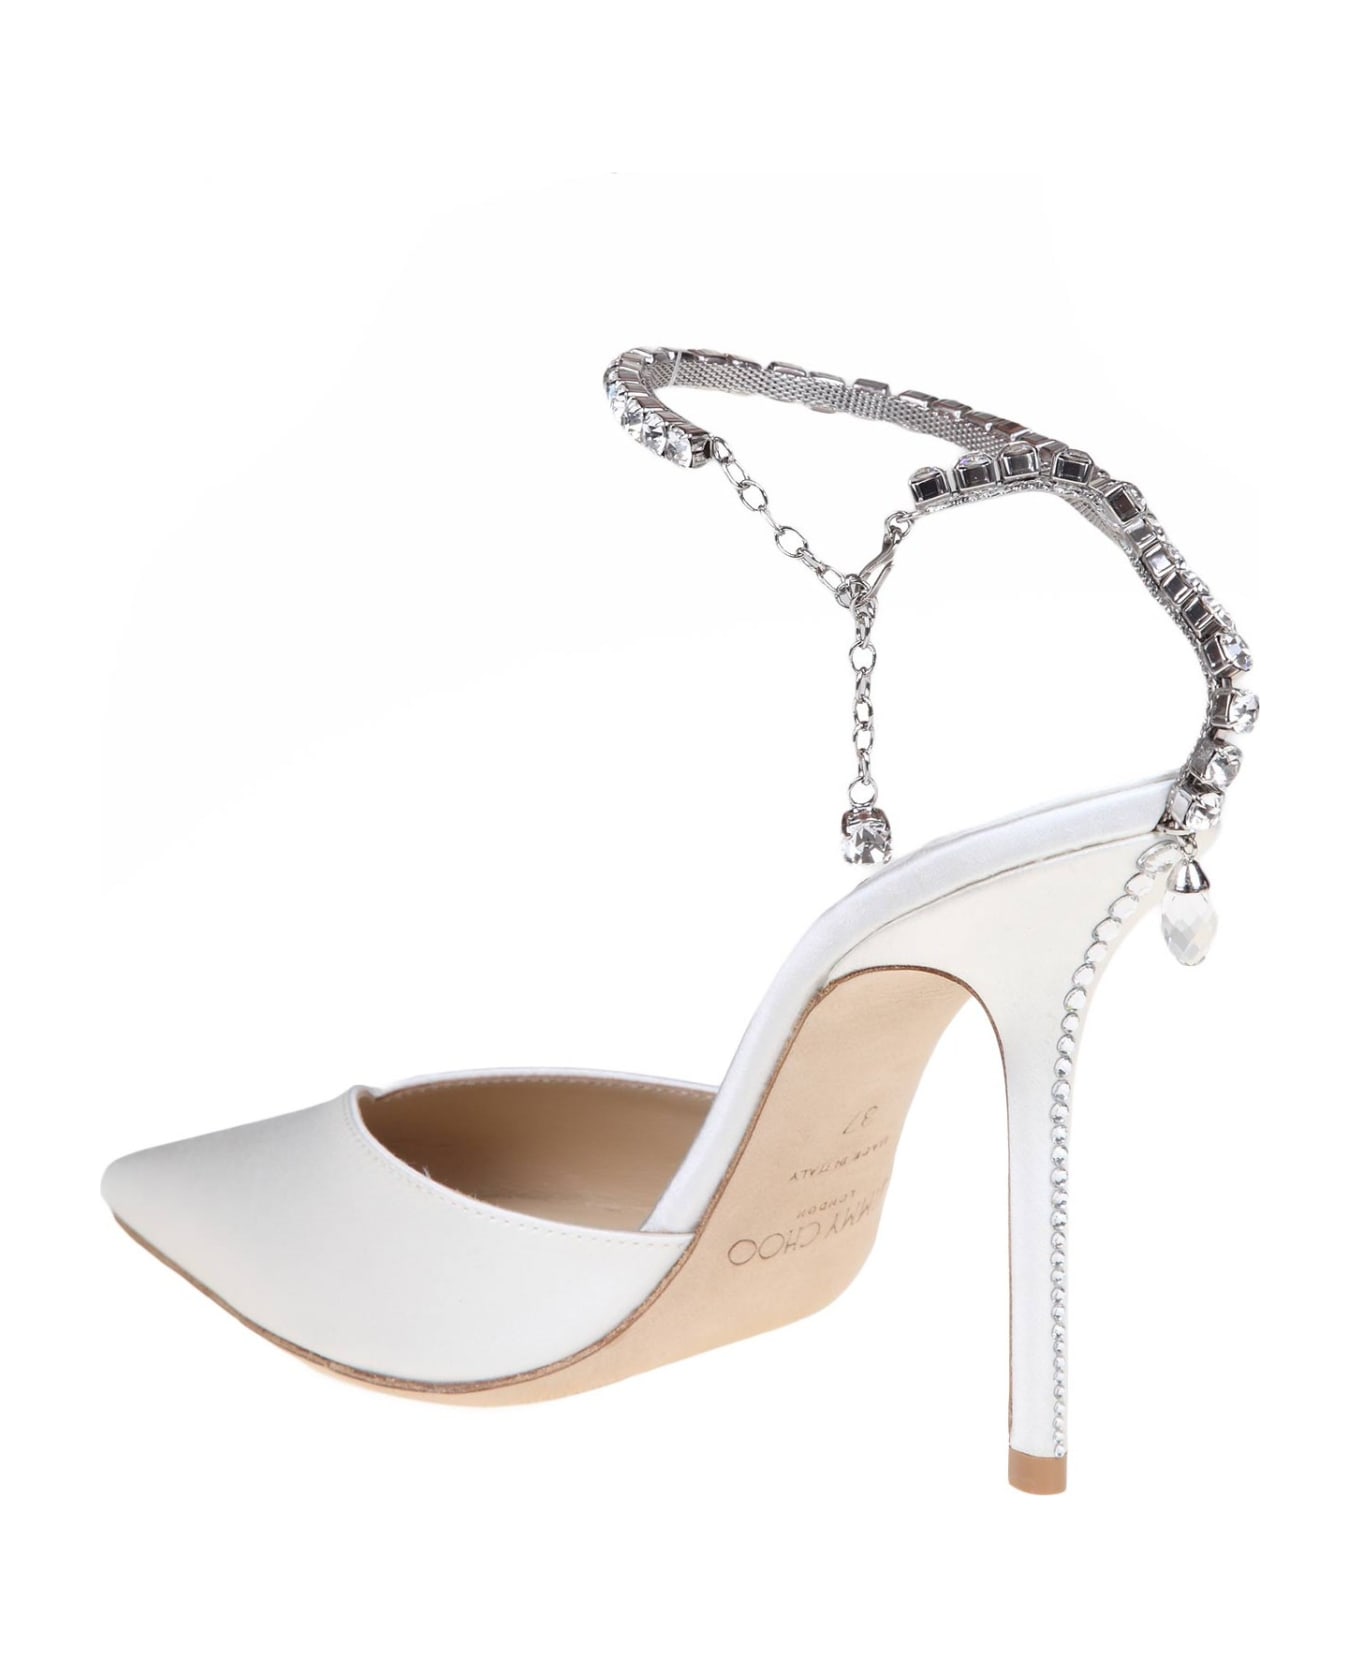 Jimmy Choo Slingback Saeda 100 In Satin With Applied Crystals - Ivory/Crystal